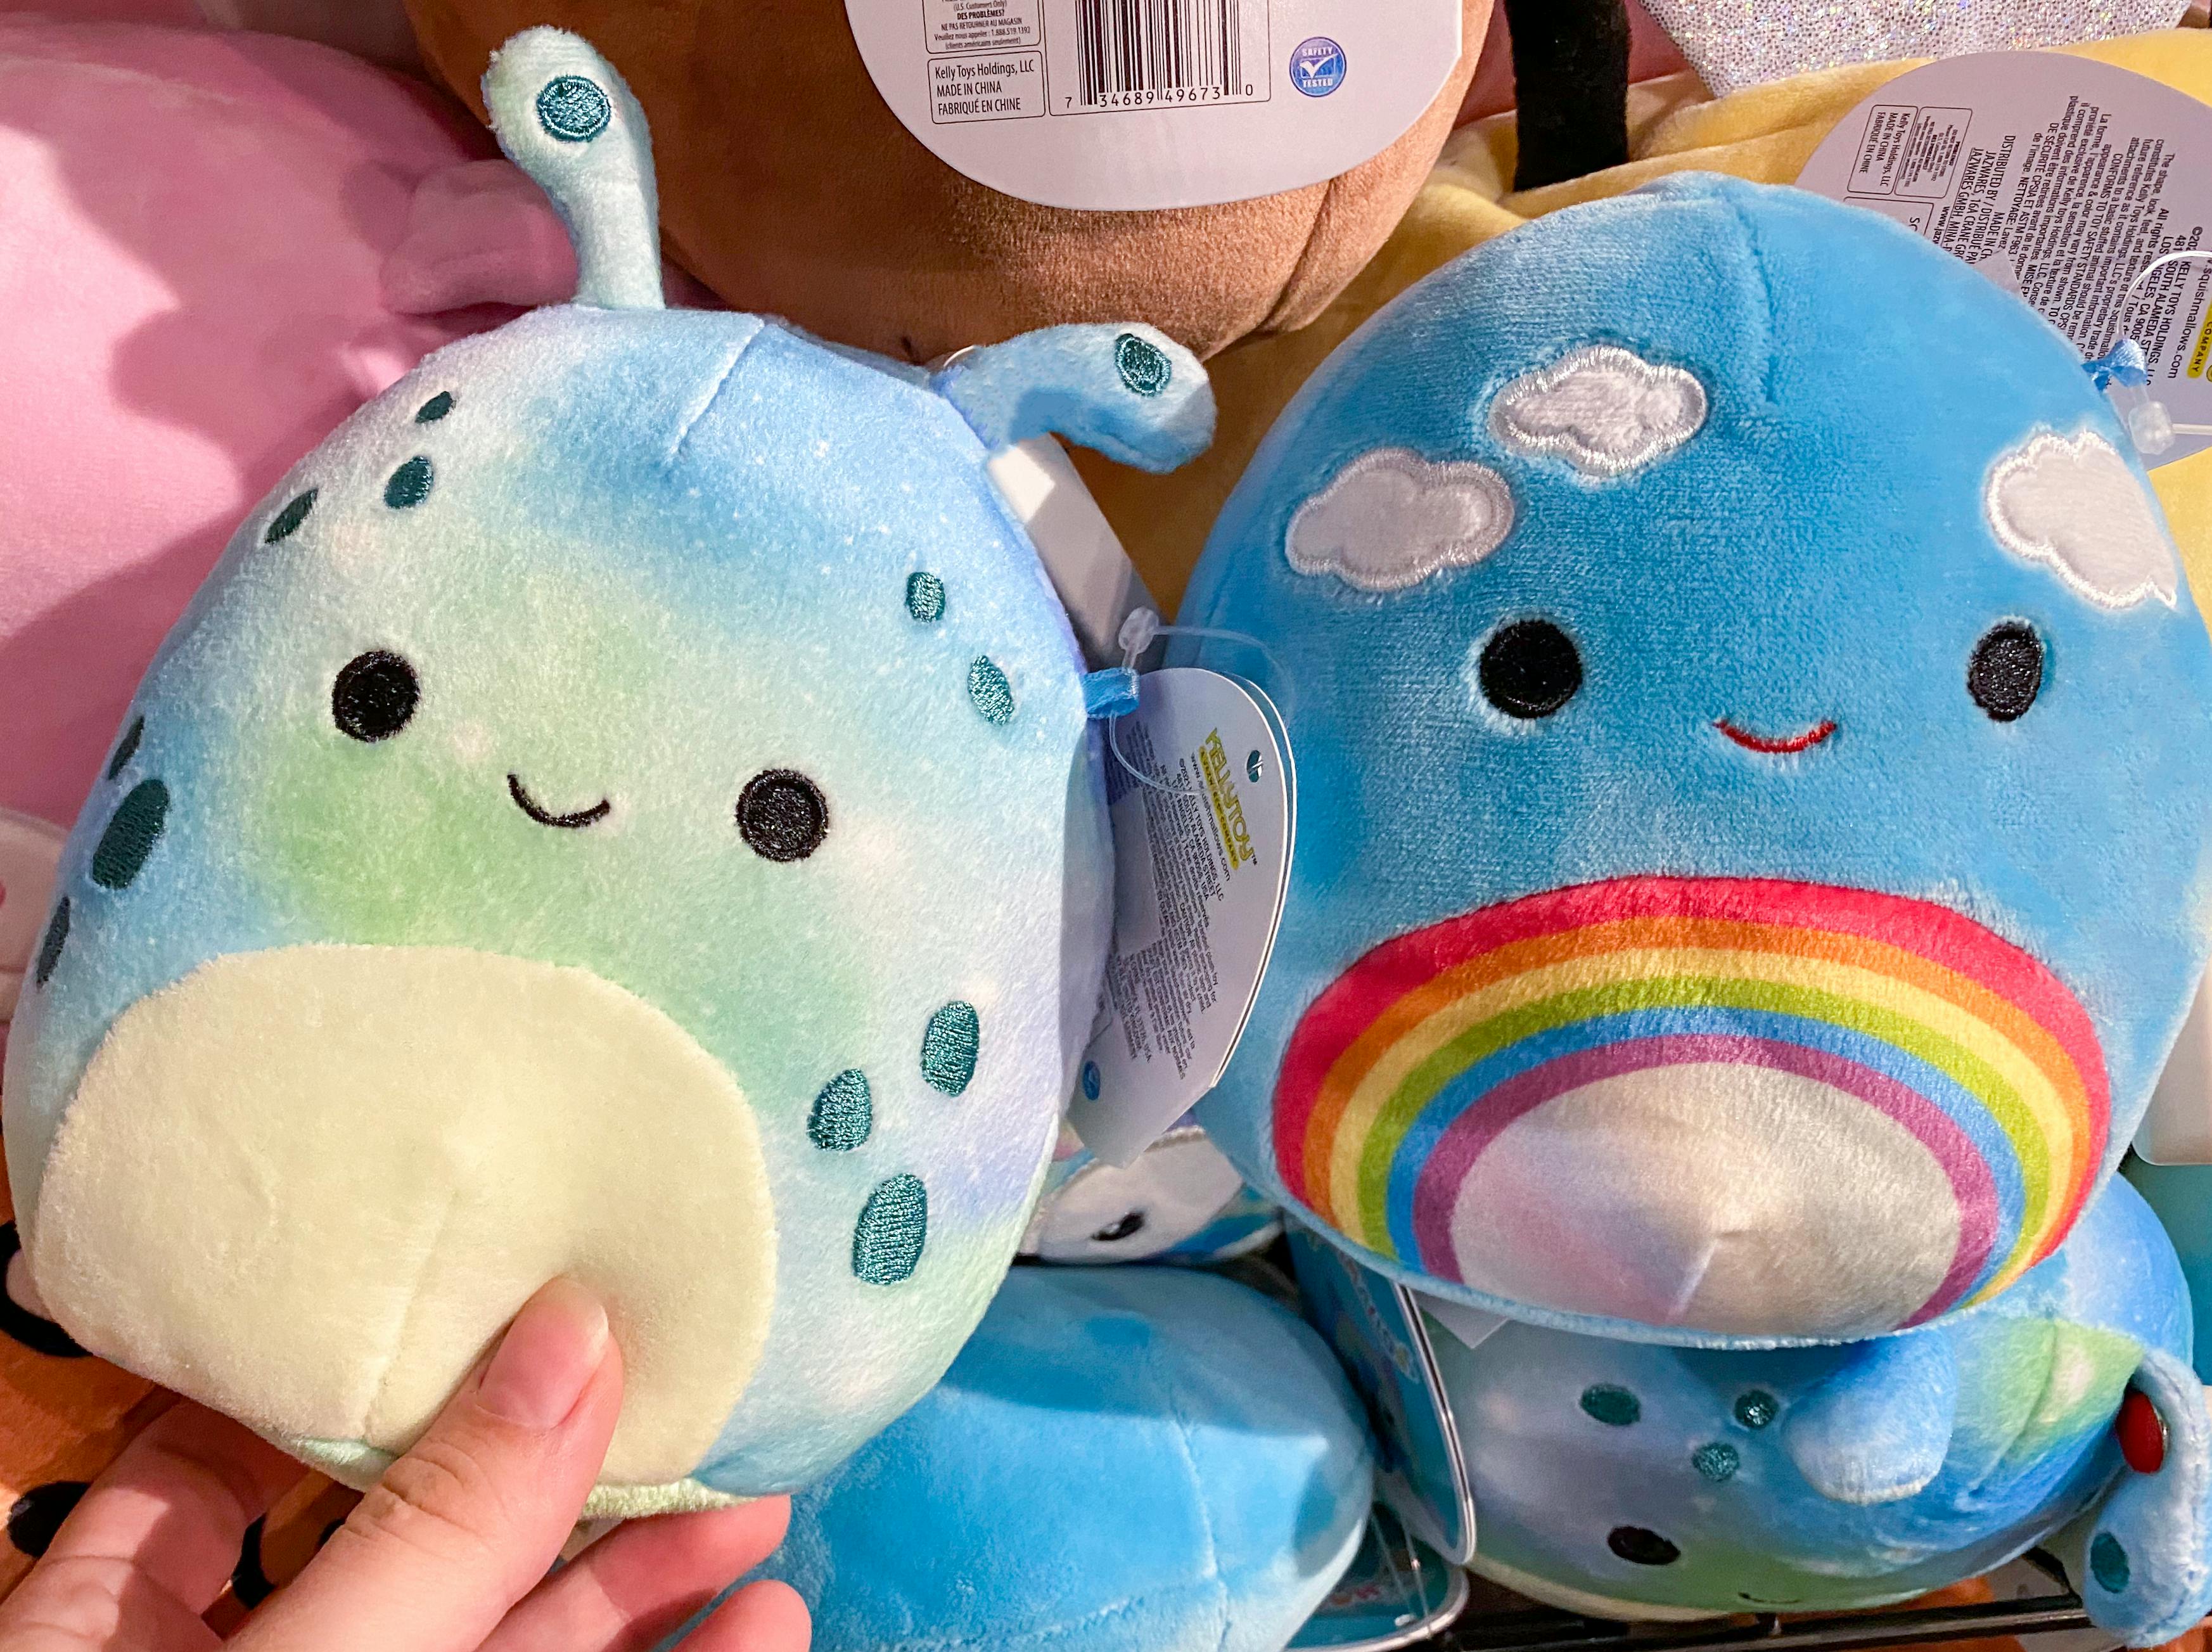 Mini Squishmallows on display at Hot Topic.